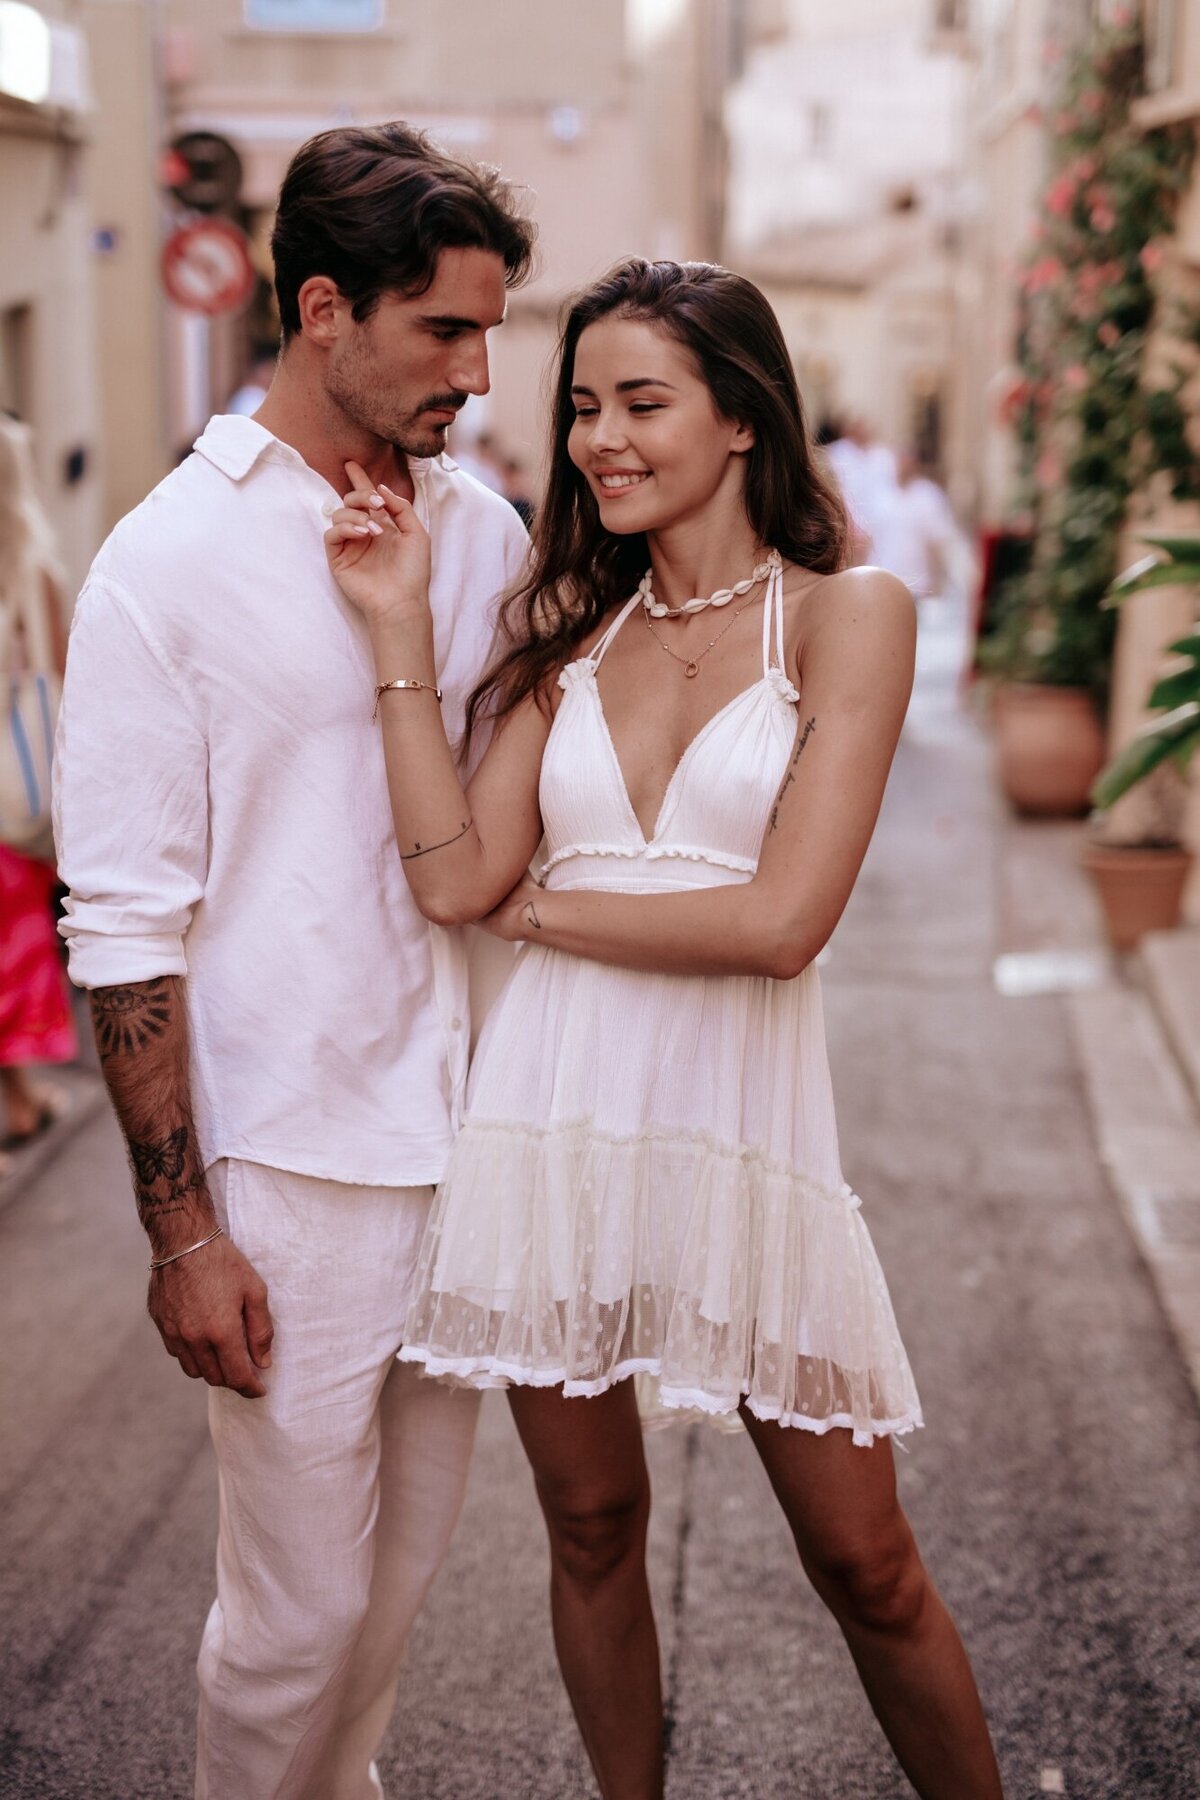 Man looking loving at his fiance while she looks off and smiles.